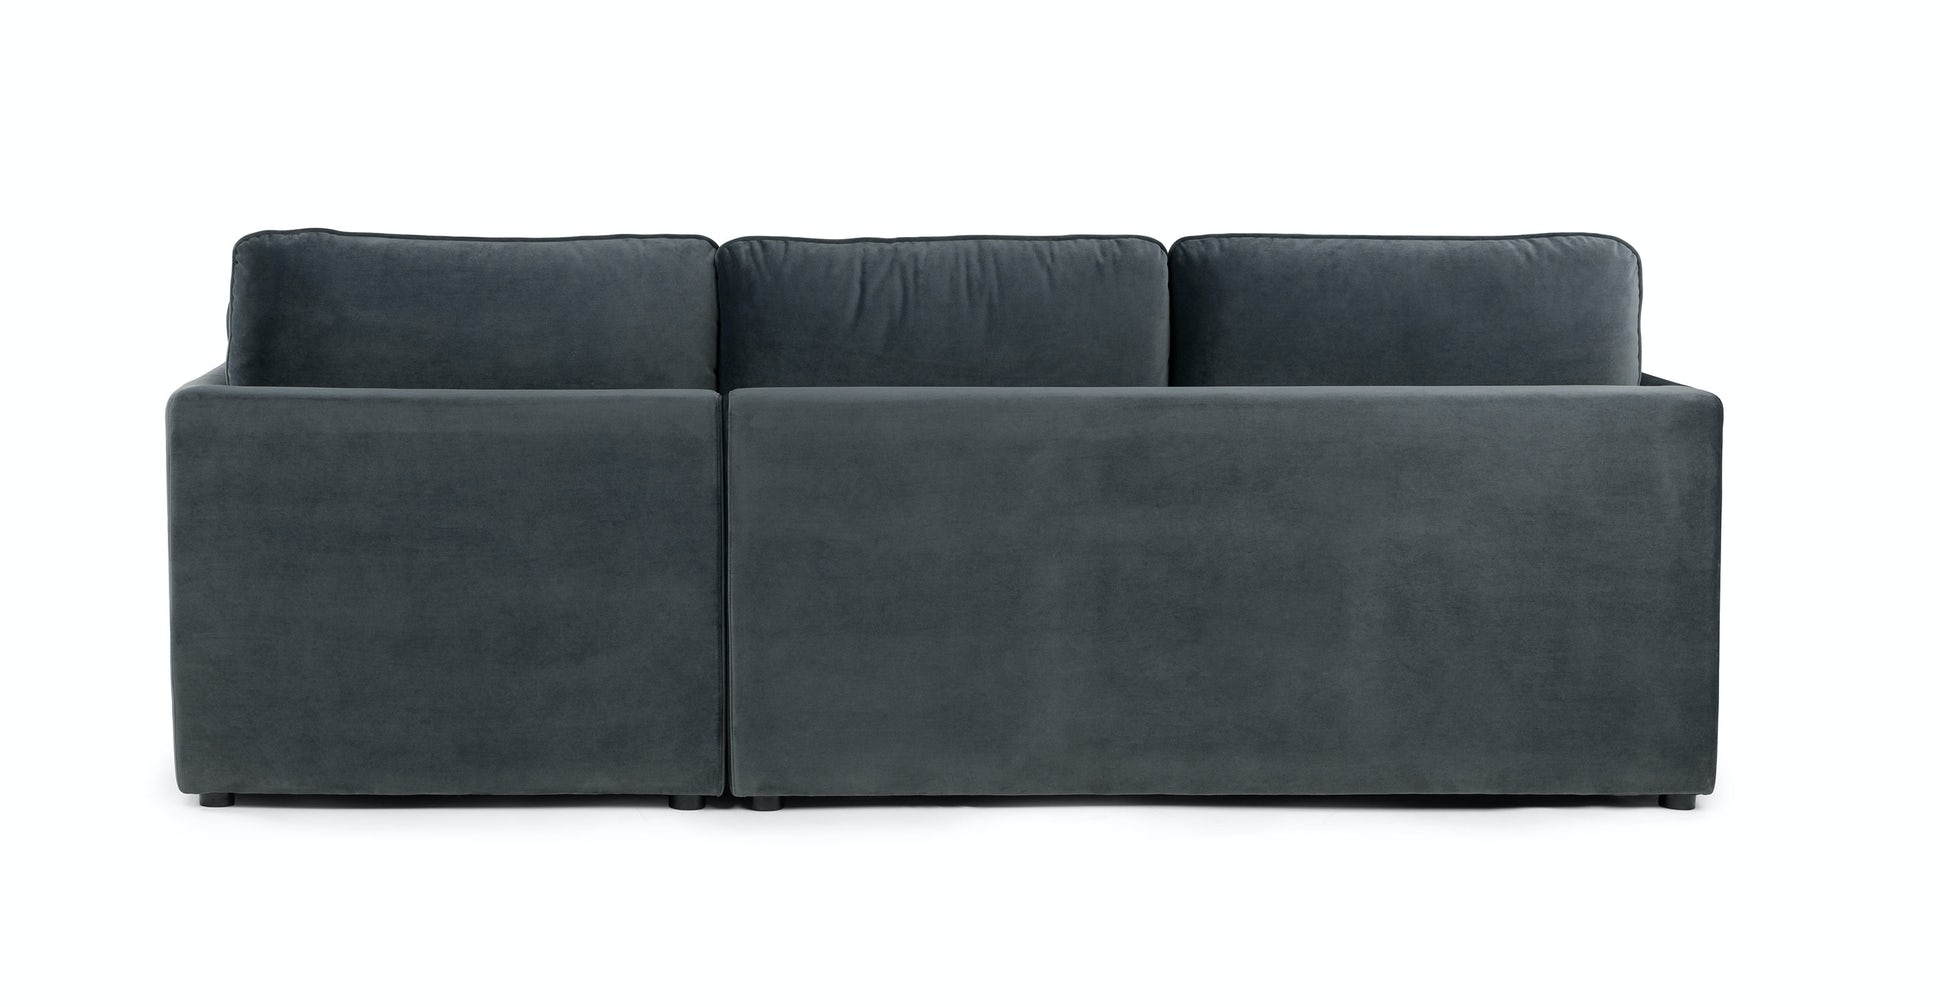 Oneira Deep Sea Blue Right Sofa Bed - Image 3